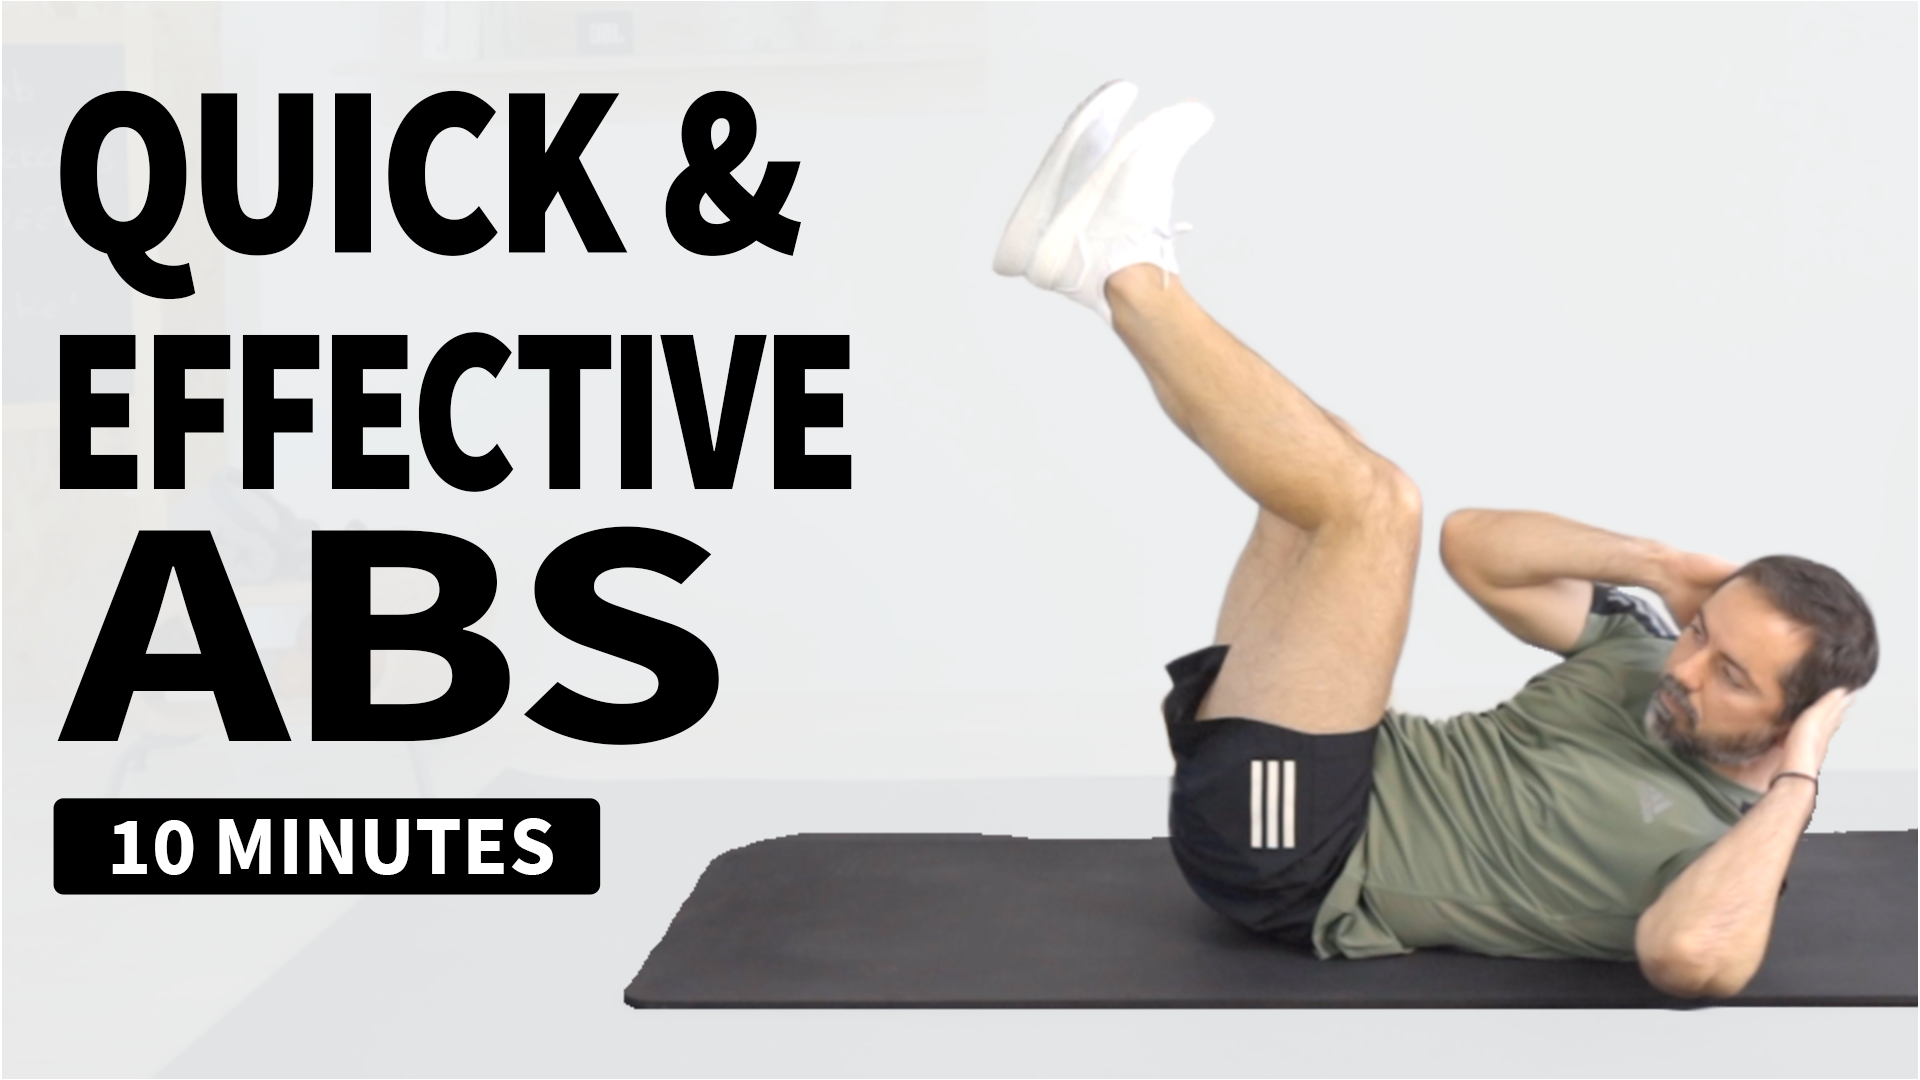 Quick & Effective ABS Workout